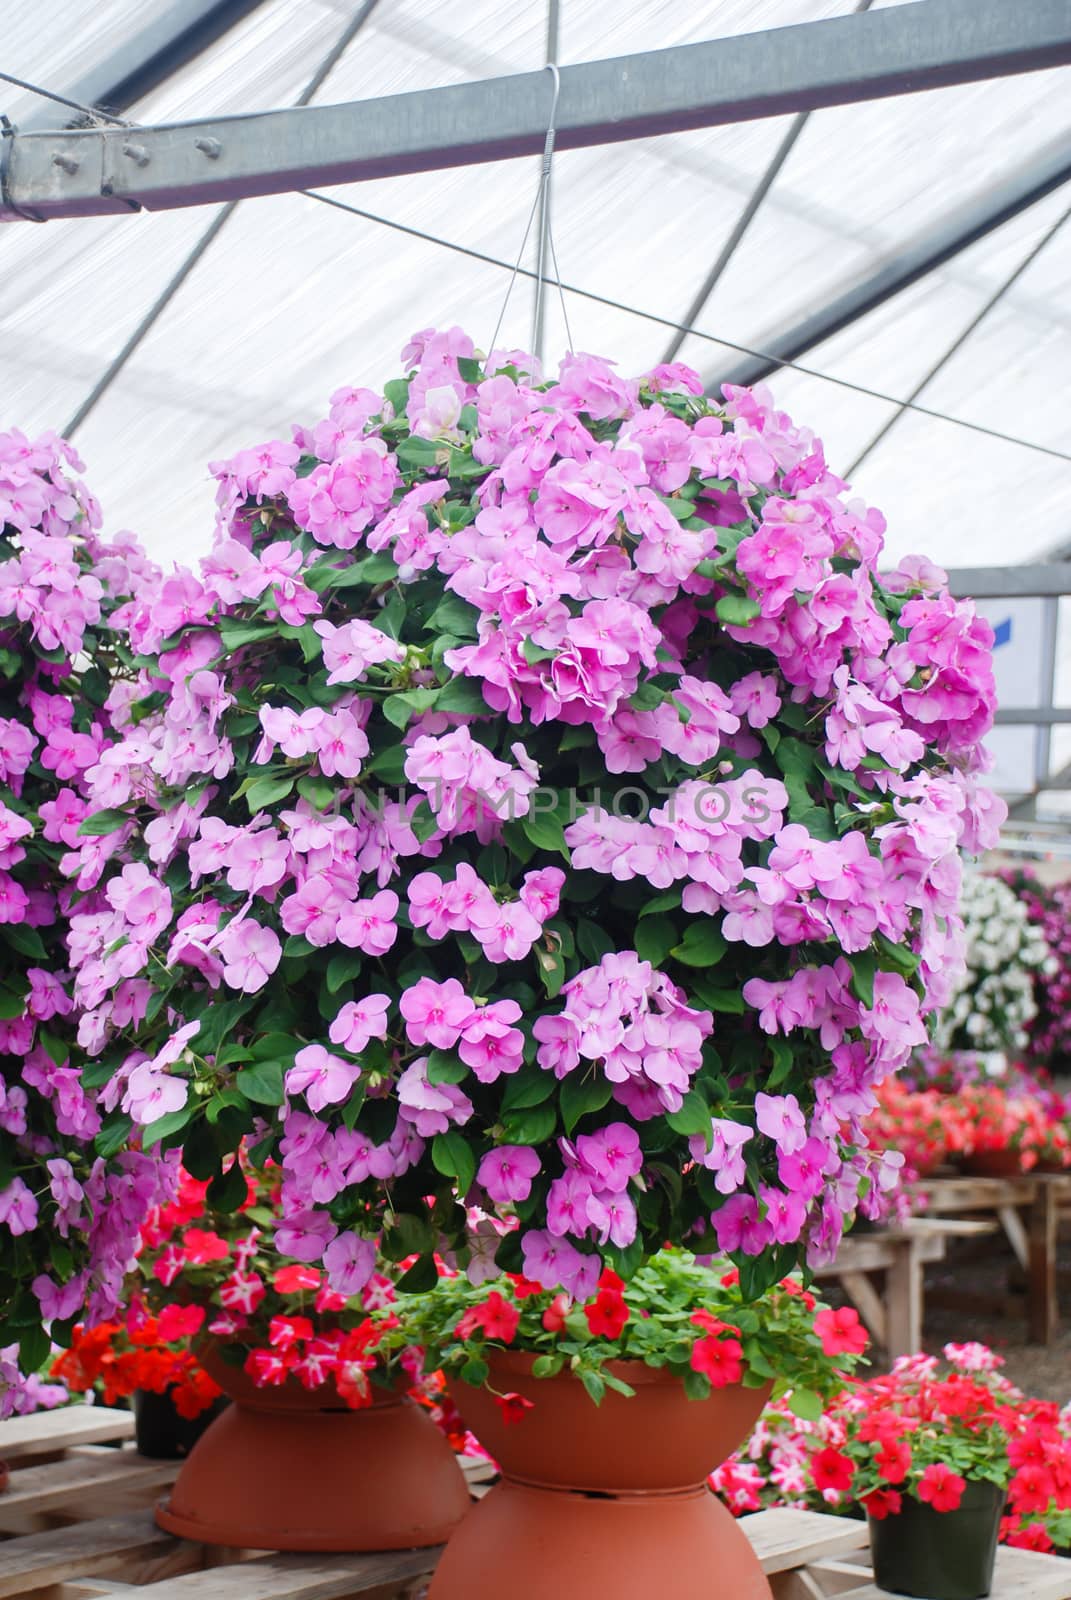 impatiens in potted, scientific name Impatiens walleriana flower by yuiyuize